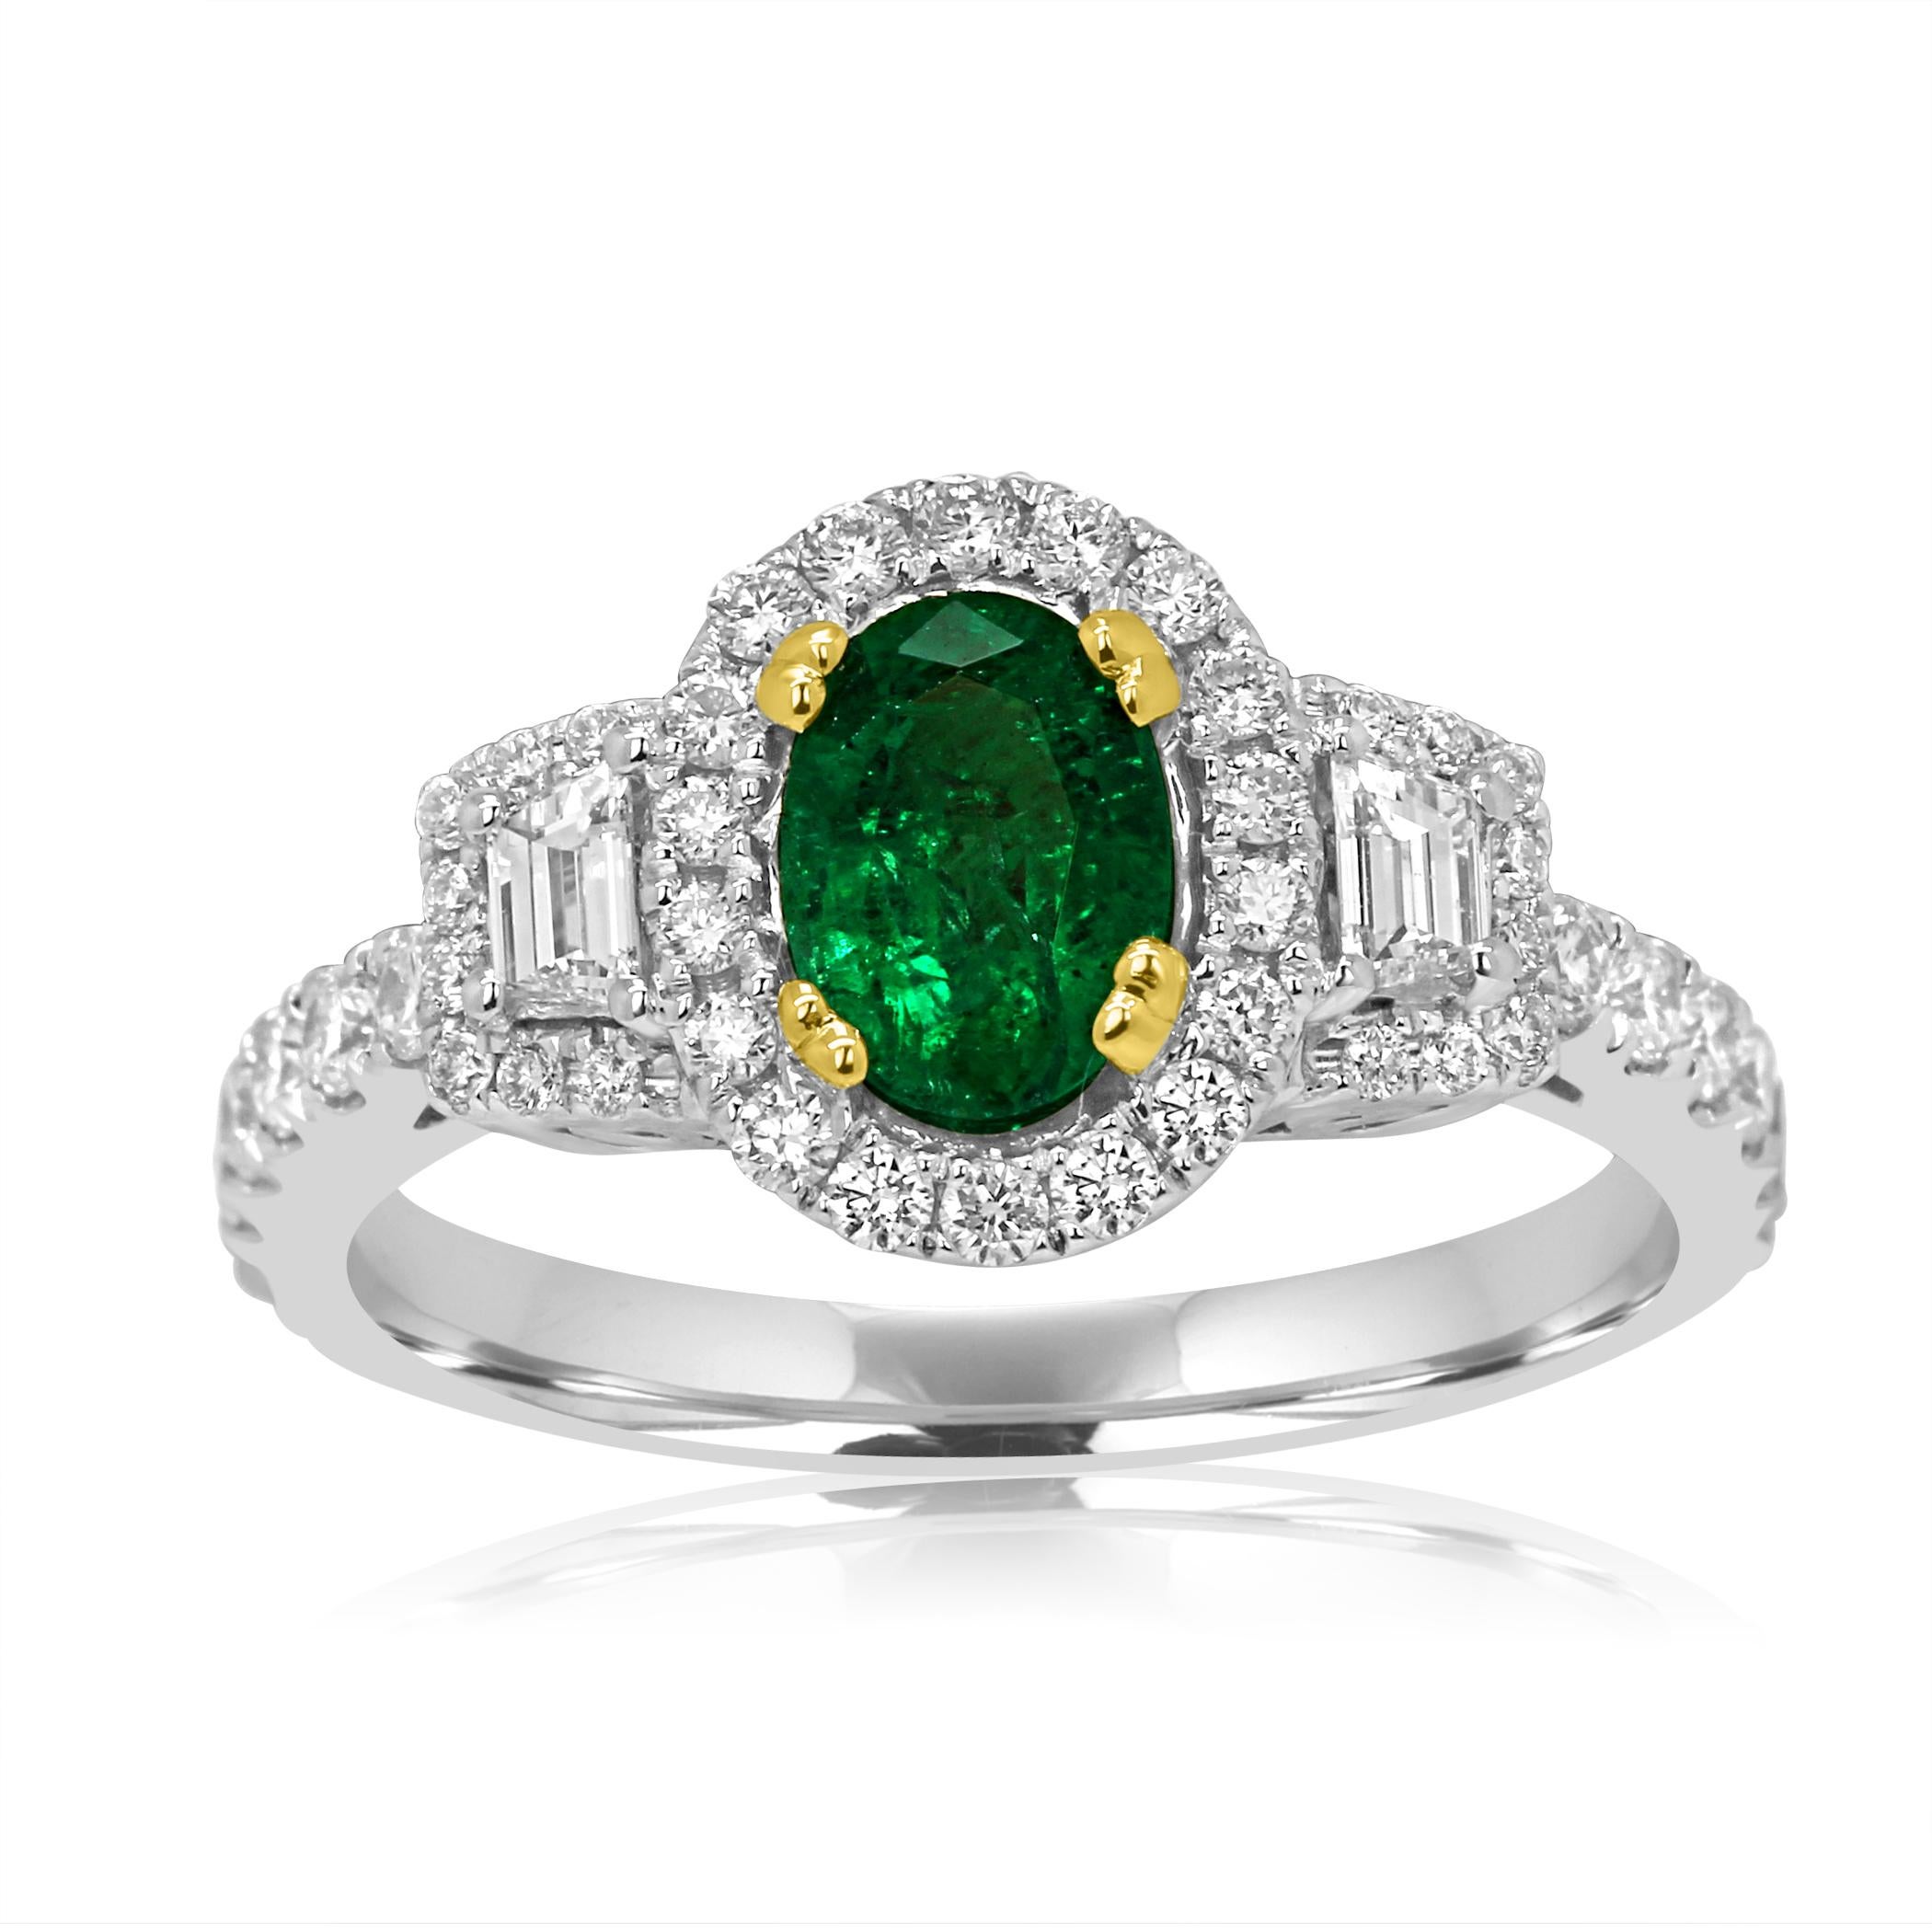 Gorgeous Emerald Oval 0.80 Carat encircled in a single Halo of White Round Diamonds 0.37 Carat Flanked with 2 White Diamond Trapezoids on the side 0.16 Carat in 14K White and Yellow Gold Thee Stone Cocktail Ring.

Total Stone Weight 1.33